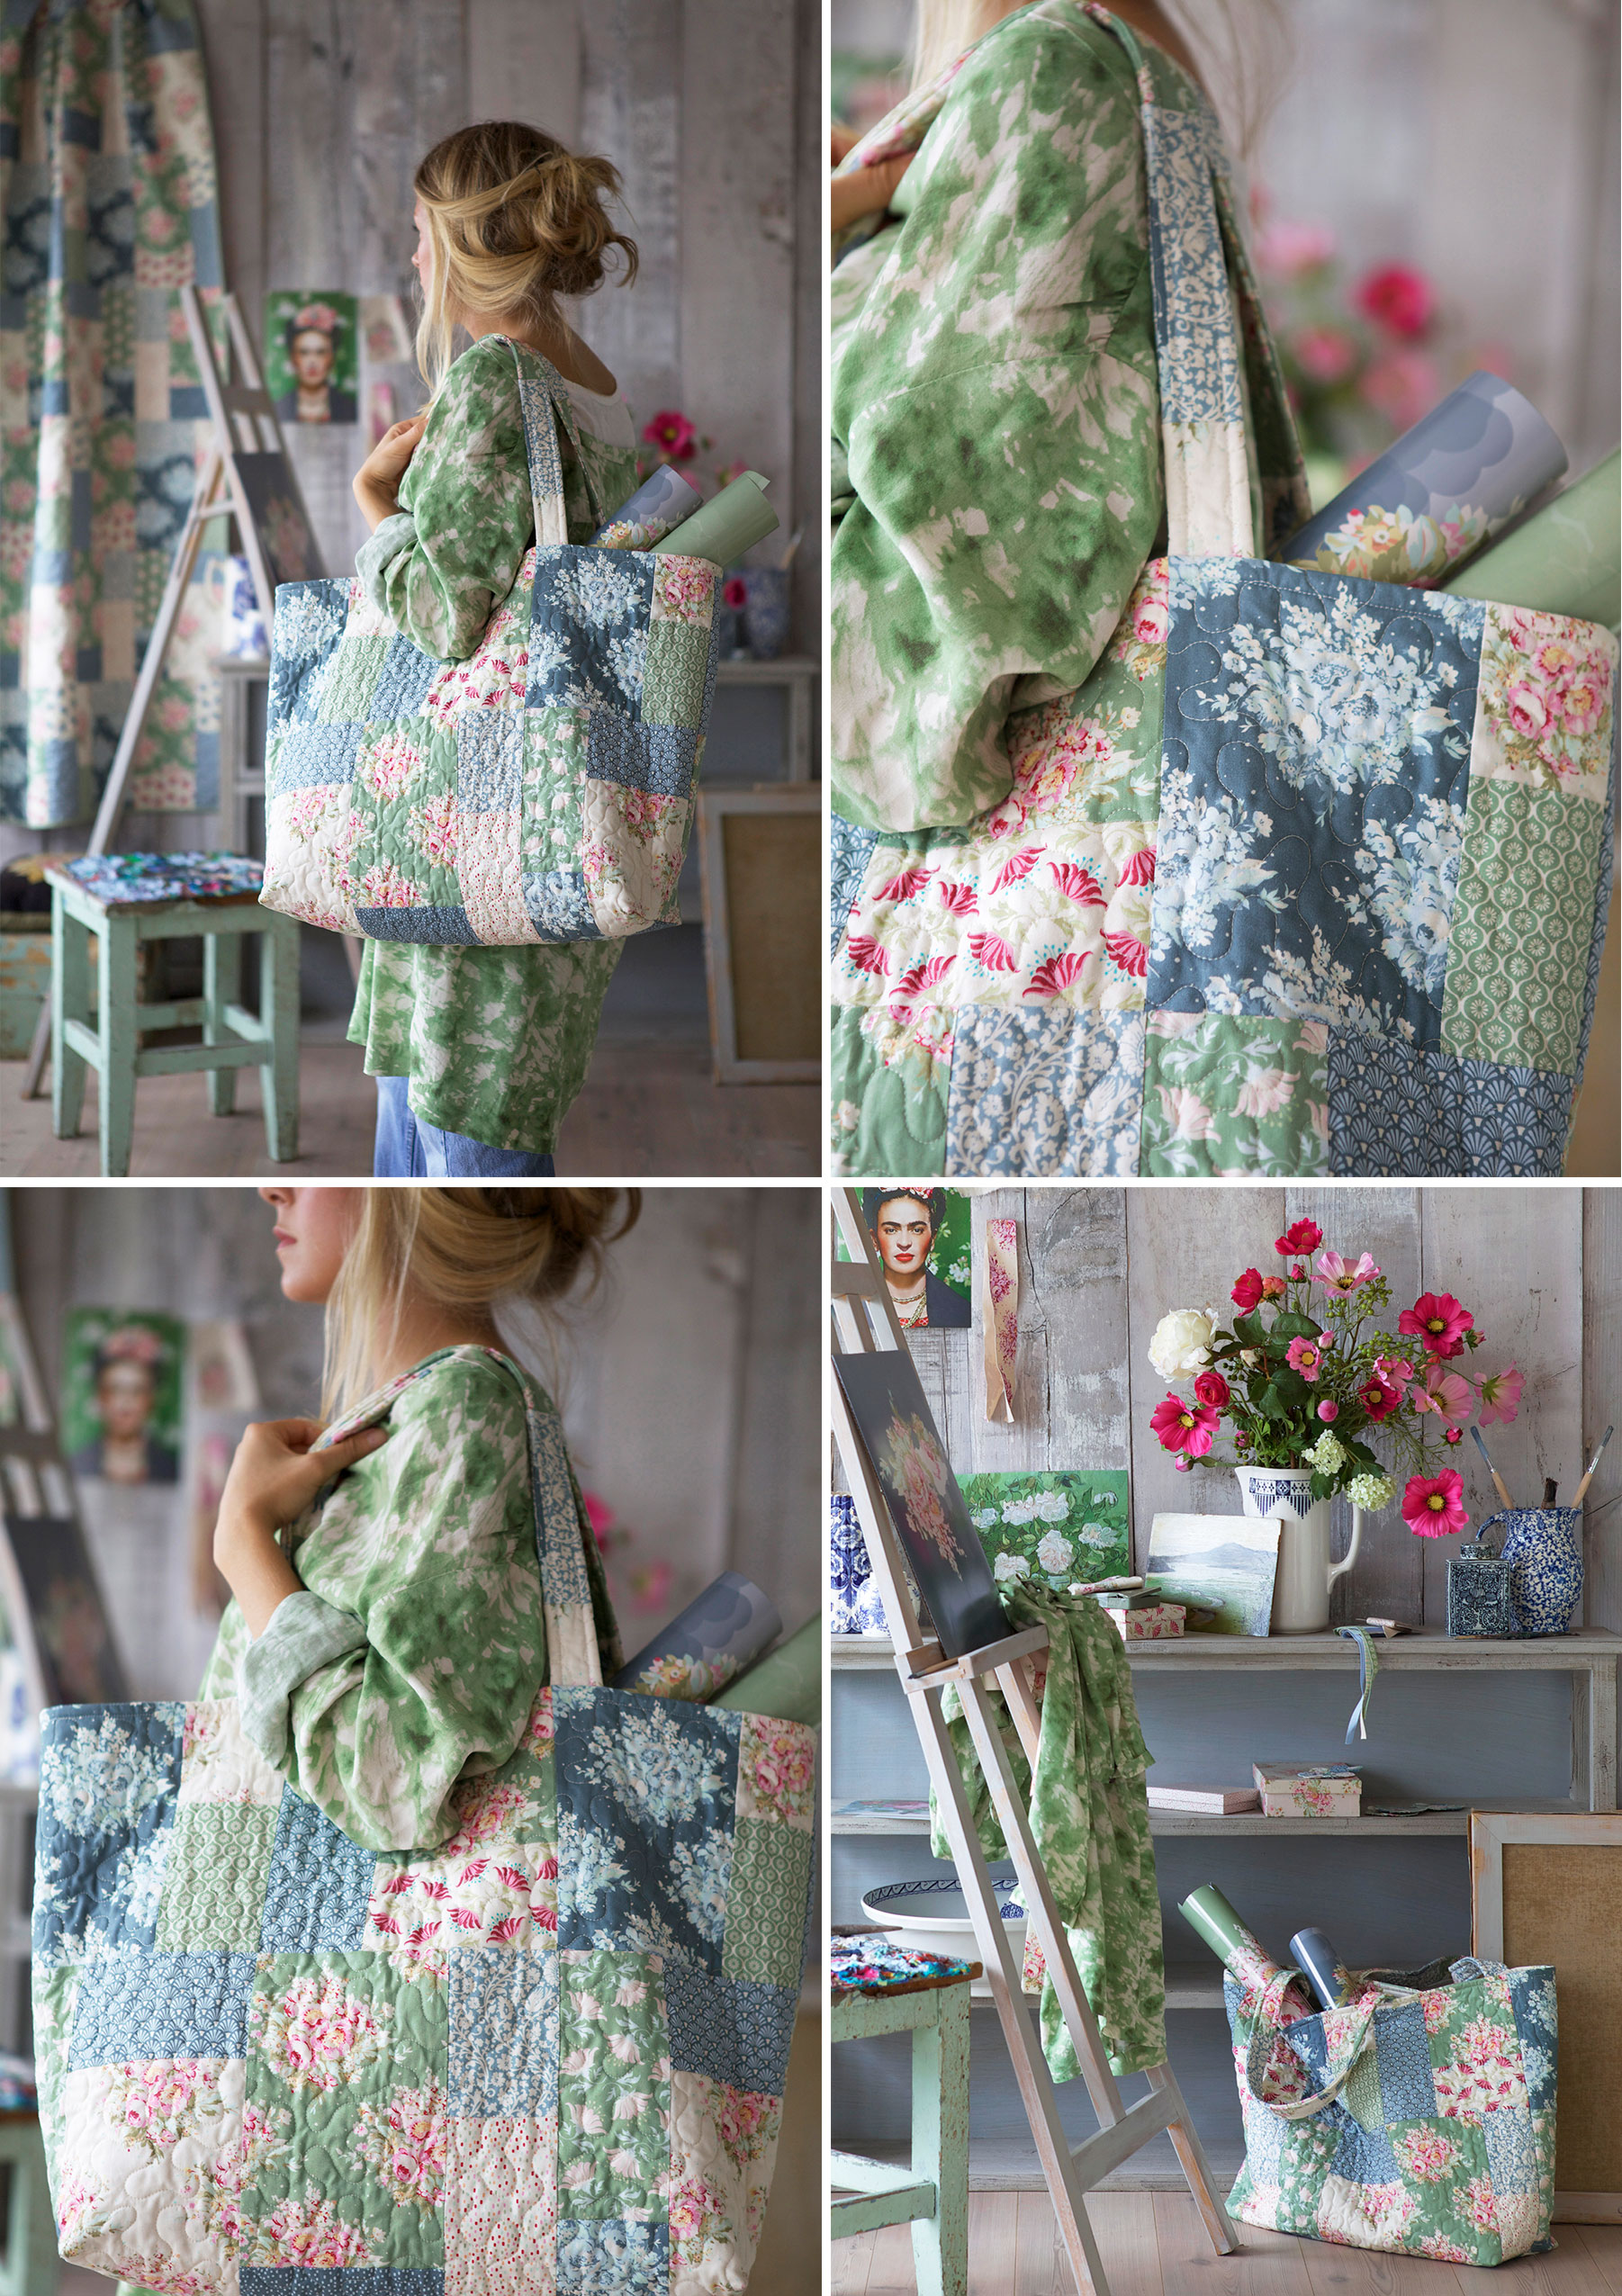 28 Bag, Tote, and Purse Patterns and Craft Ideas (Free!) - FeltMagnet